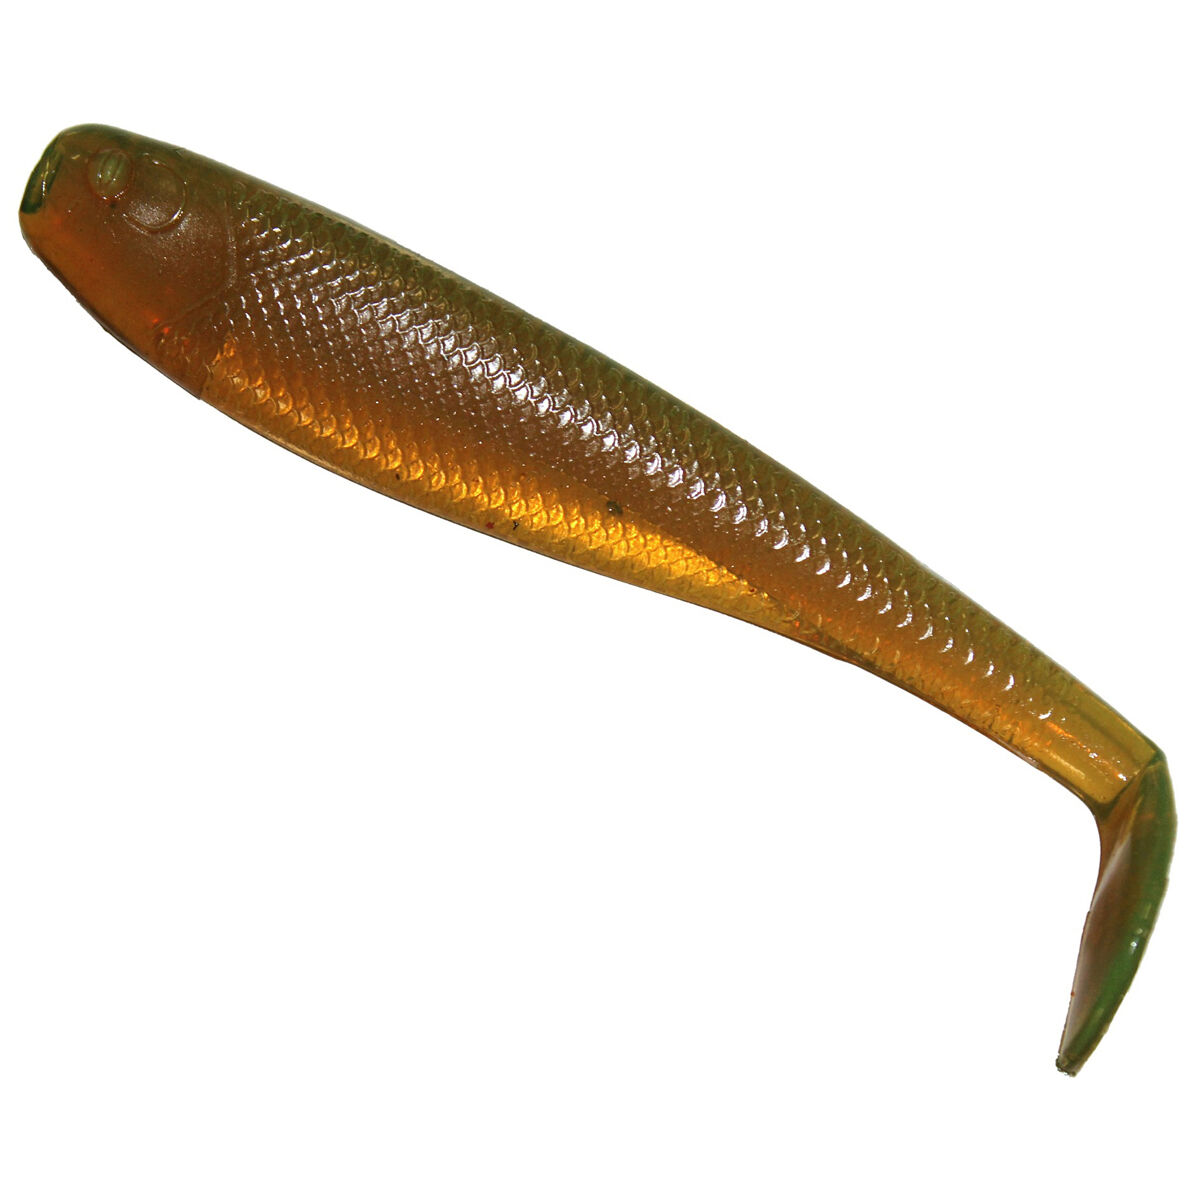 Mcarthy Paddle Tail Soft Plastic Lure 4in Motor Oil